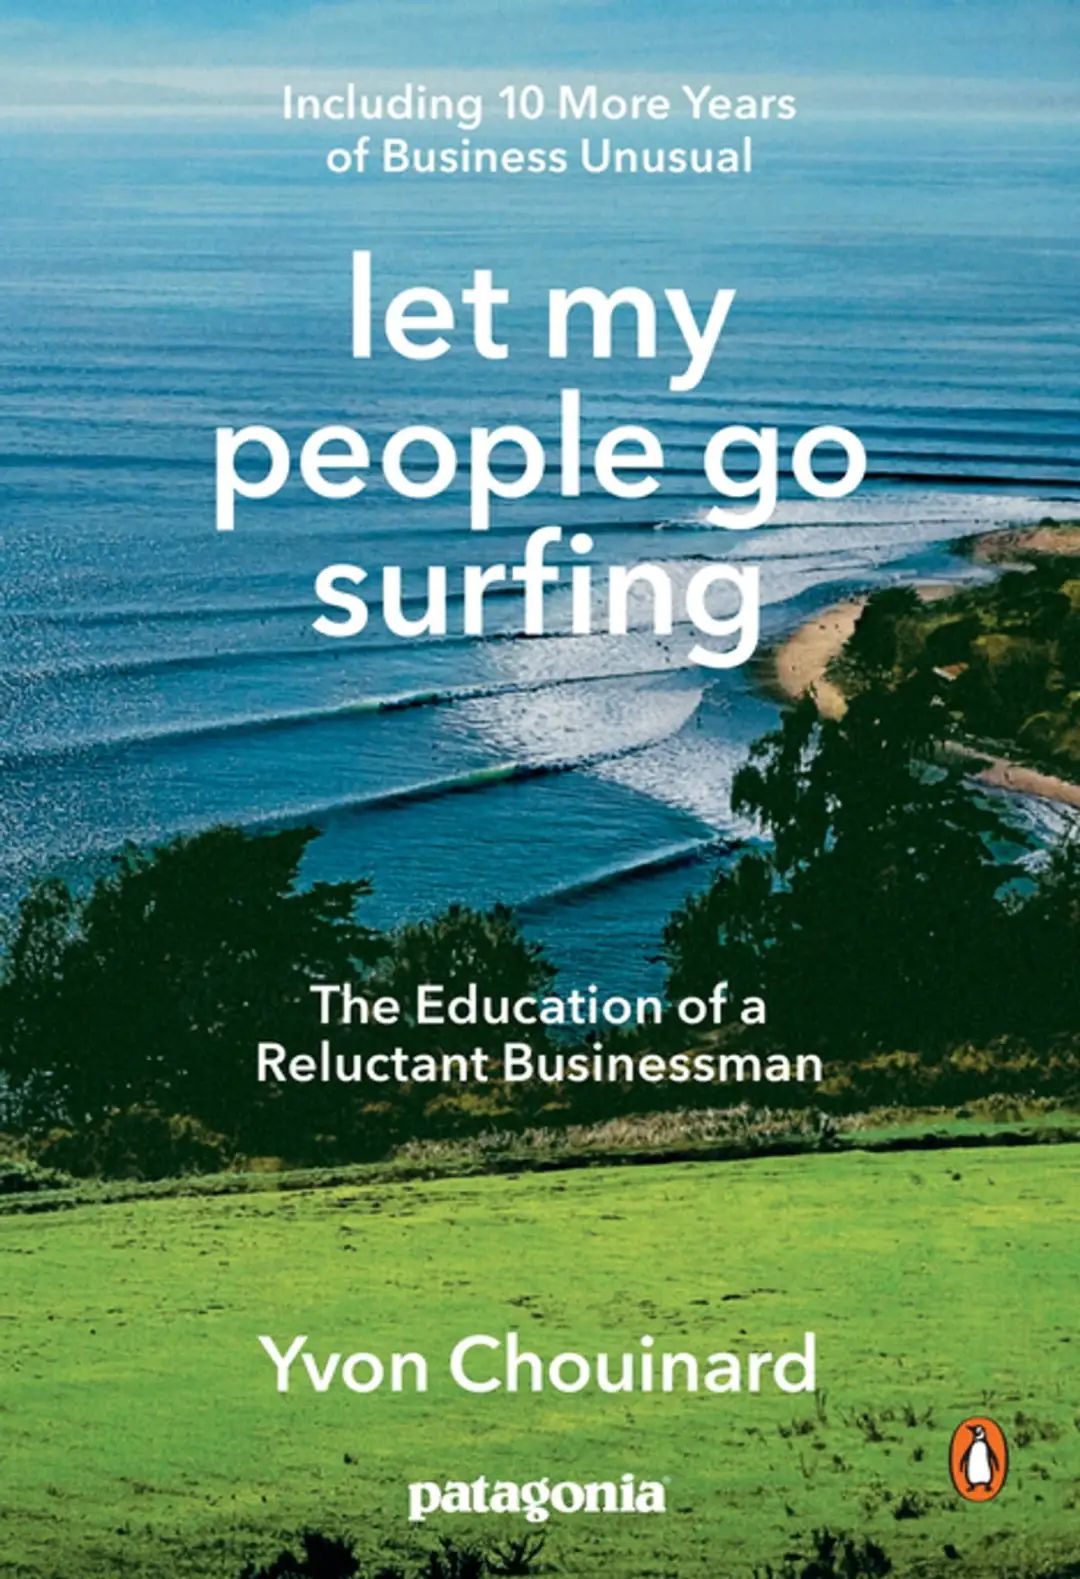 《Let my people go surfing》